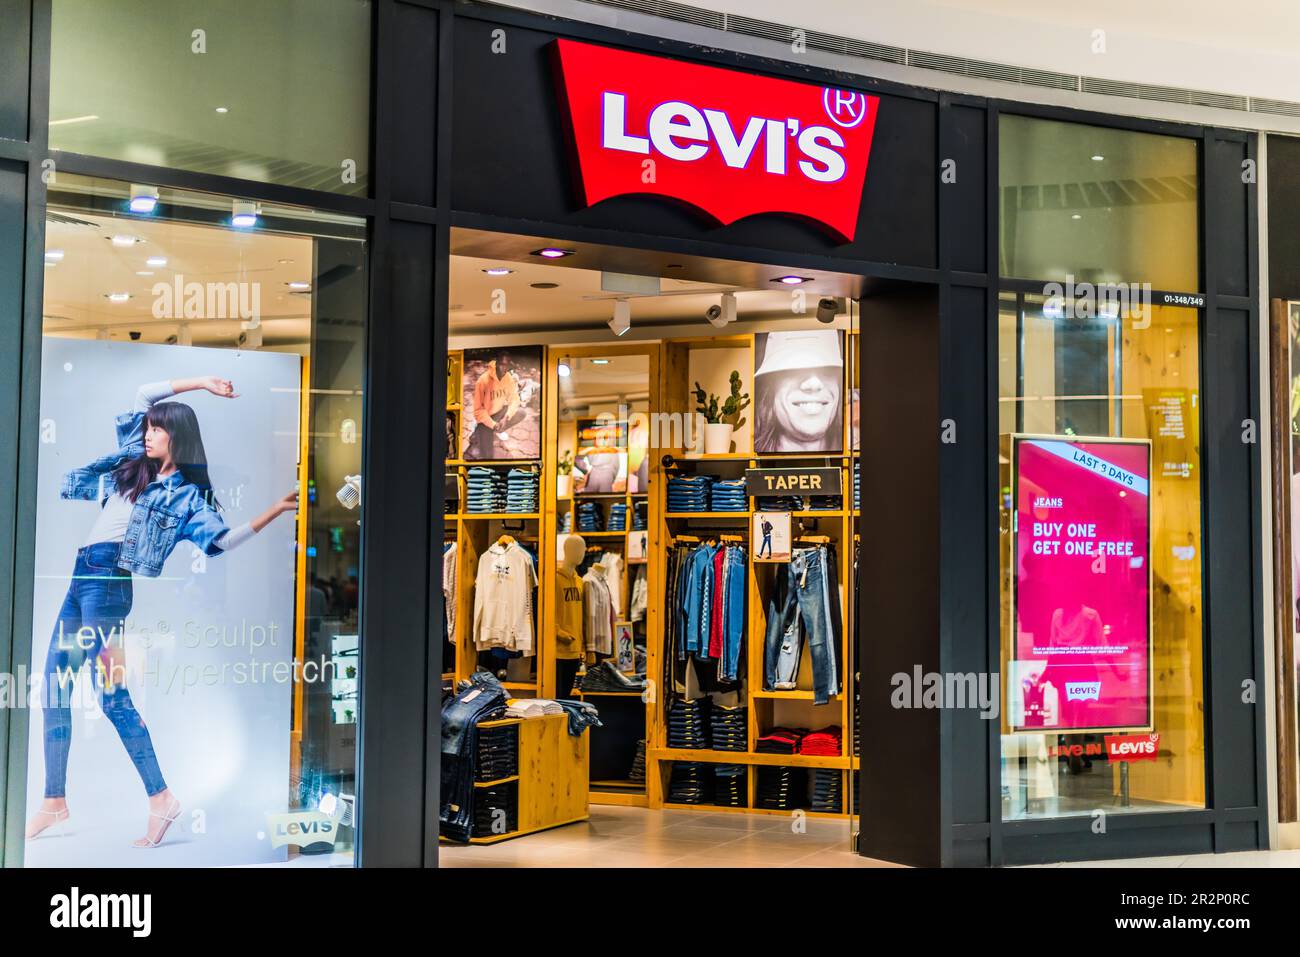 LEVIS FASHION STORE IN INGRESSO EUROMA 2 SHOPPING CENTER A ROMA Foto stock  - Alamy